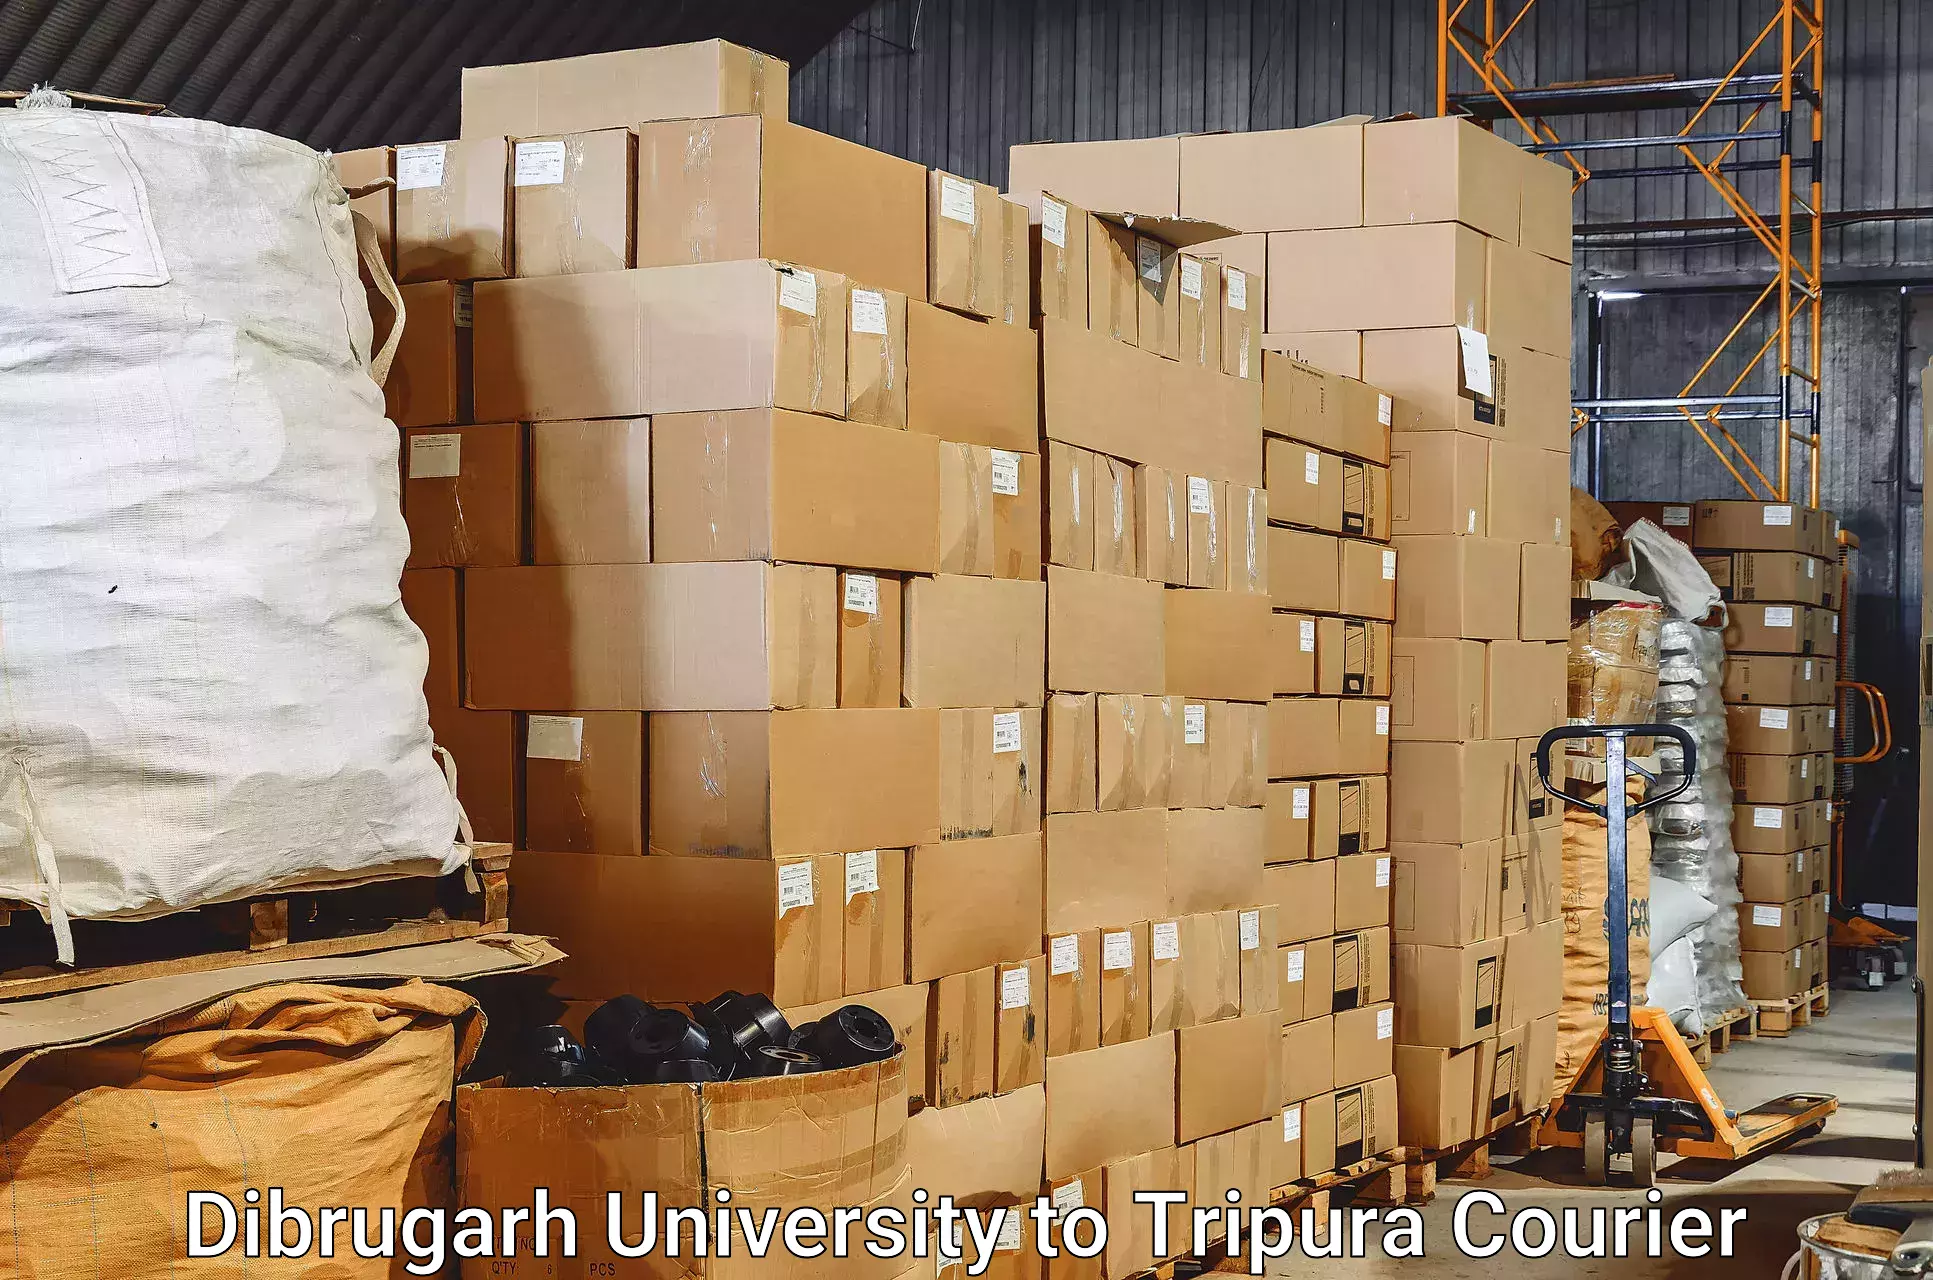 Luggage shipment specialists in Dibrugarh University to Udaipur Tripura